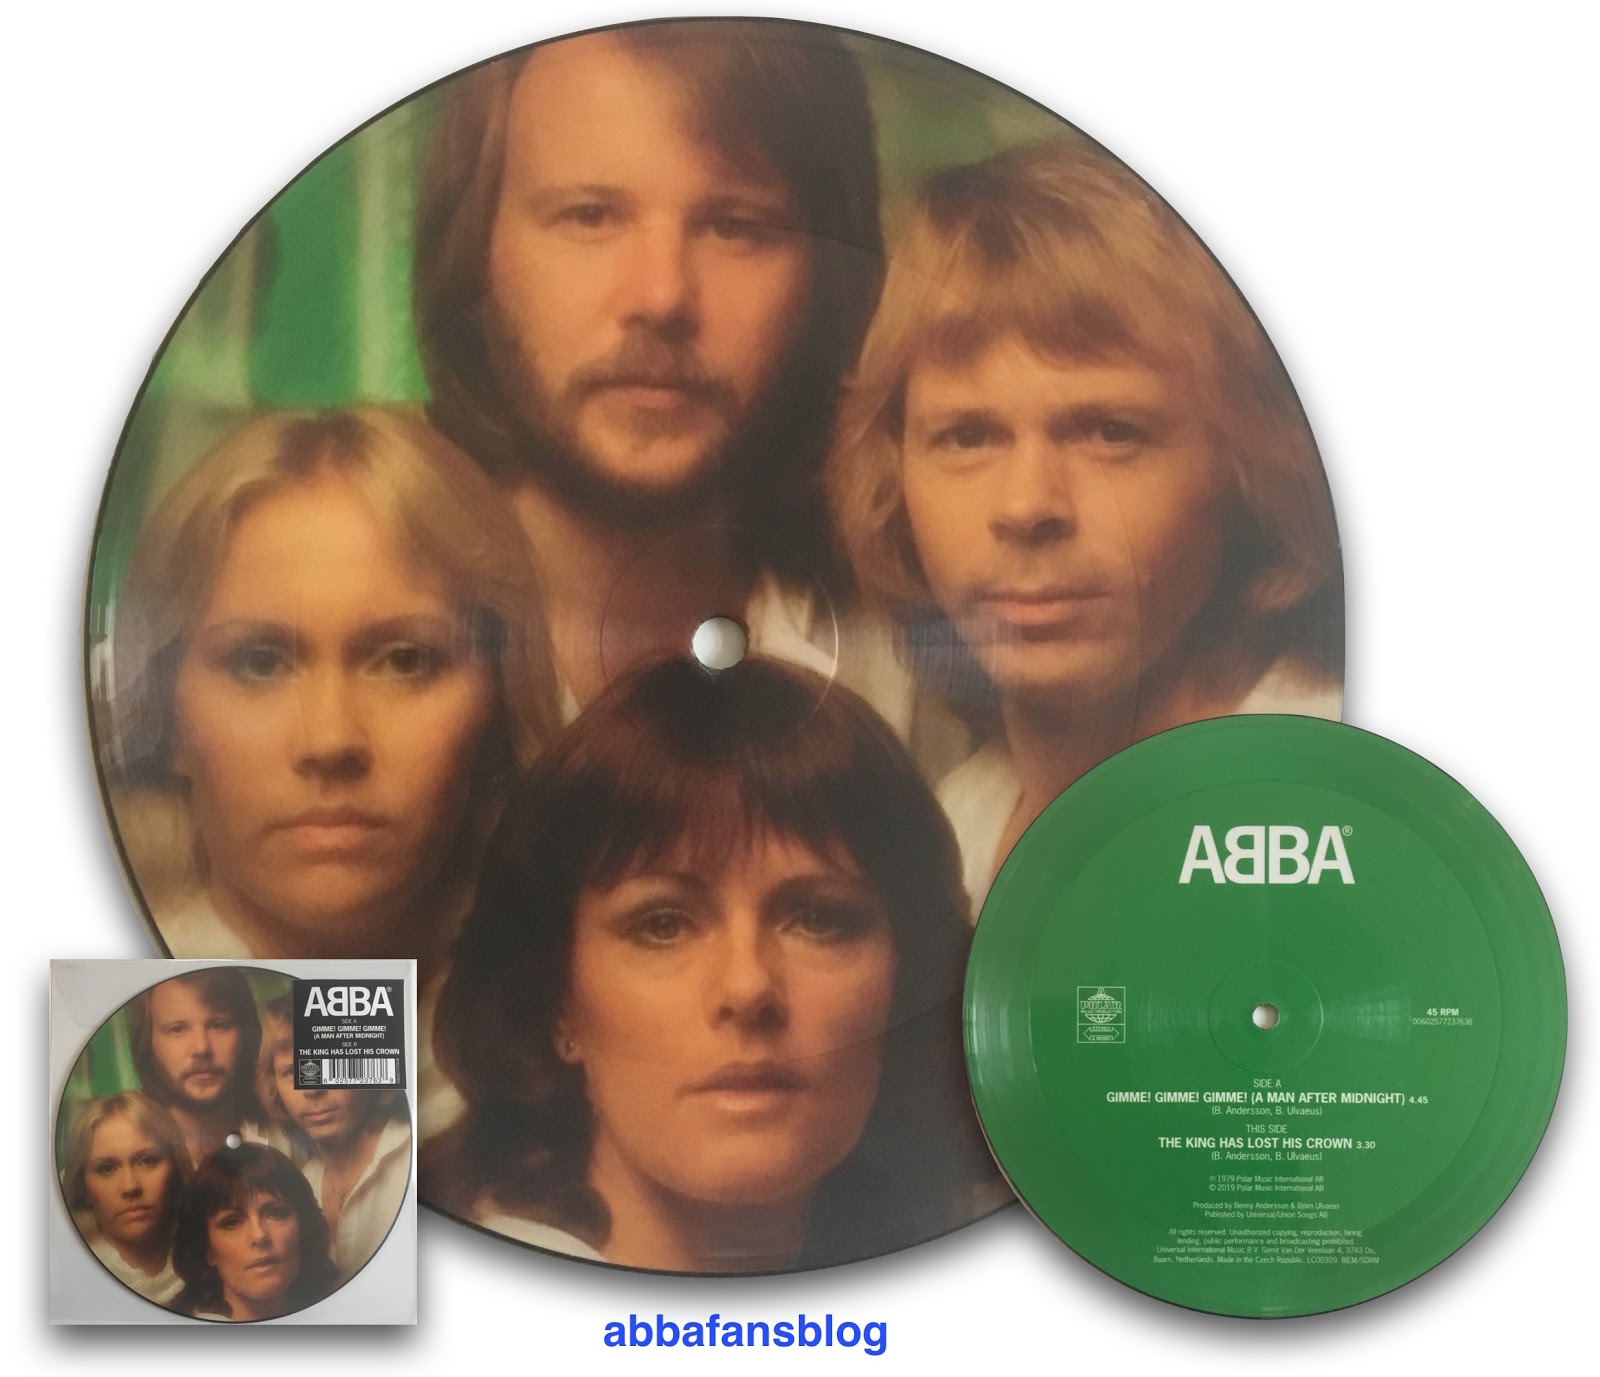 ABBA Gimme Gimme пластинка. ABBA - Gimme! Gimme! Gimme! (A man after Midnight). Абба пластинки фото. ABBA - Gimme! Gimme! Gimme каверы. Abba gimme gimme gimme a man